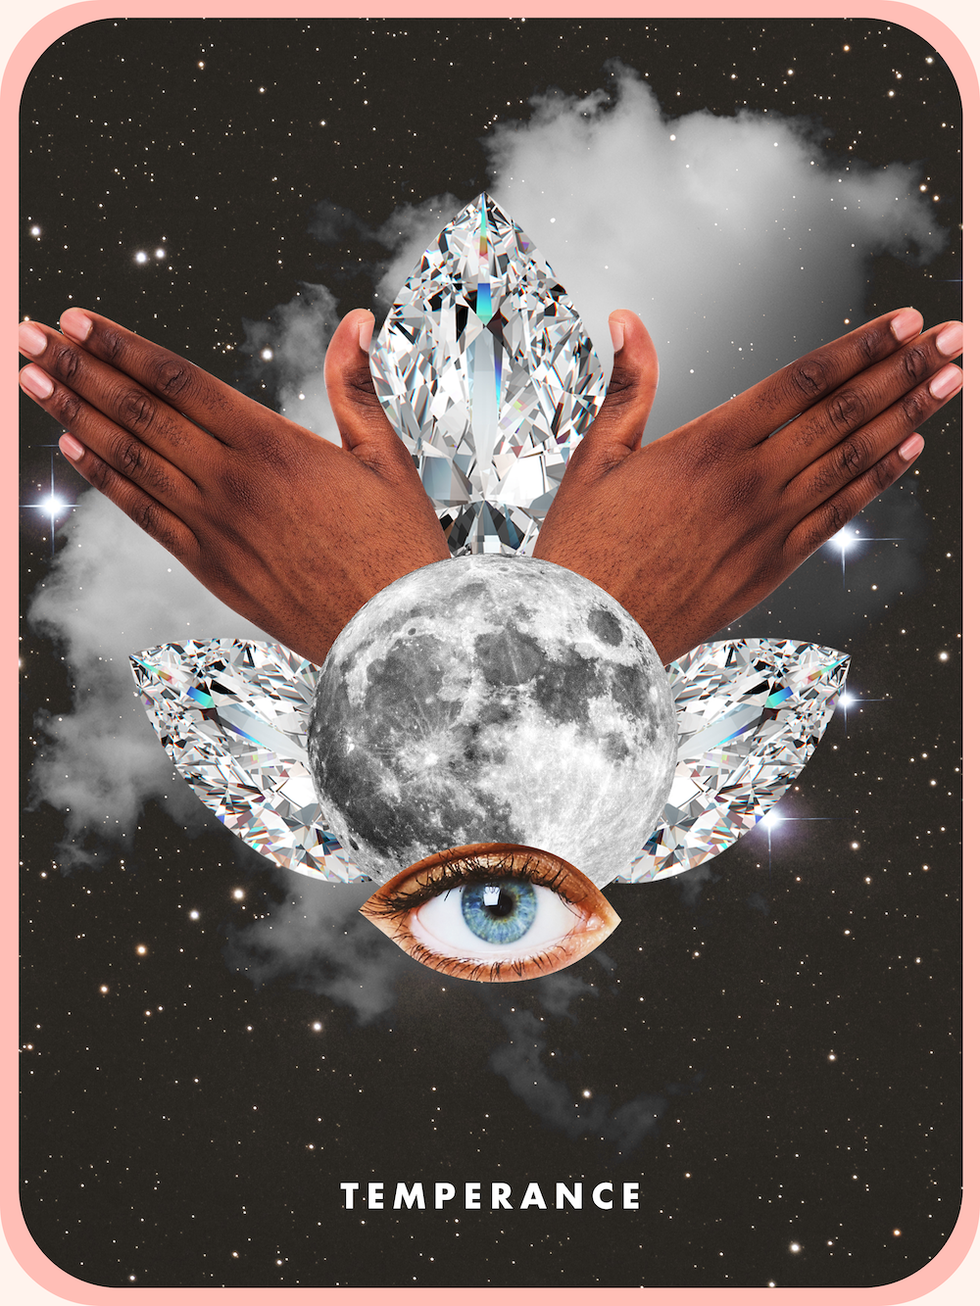 the temperance tarot card showing two hands above an eye, two diamonds, and a full moon